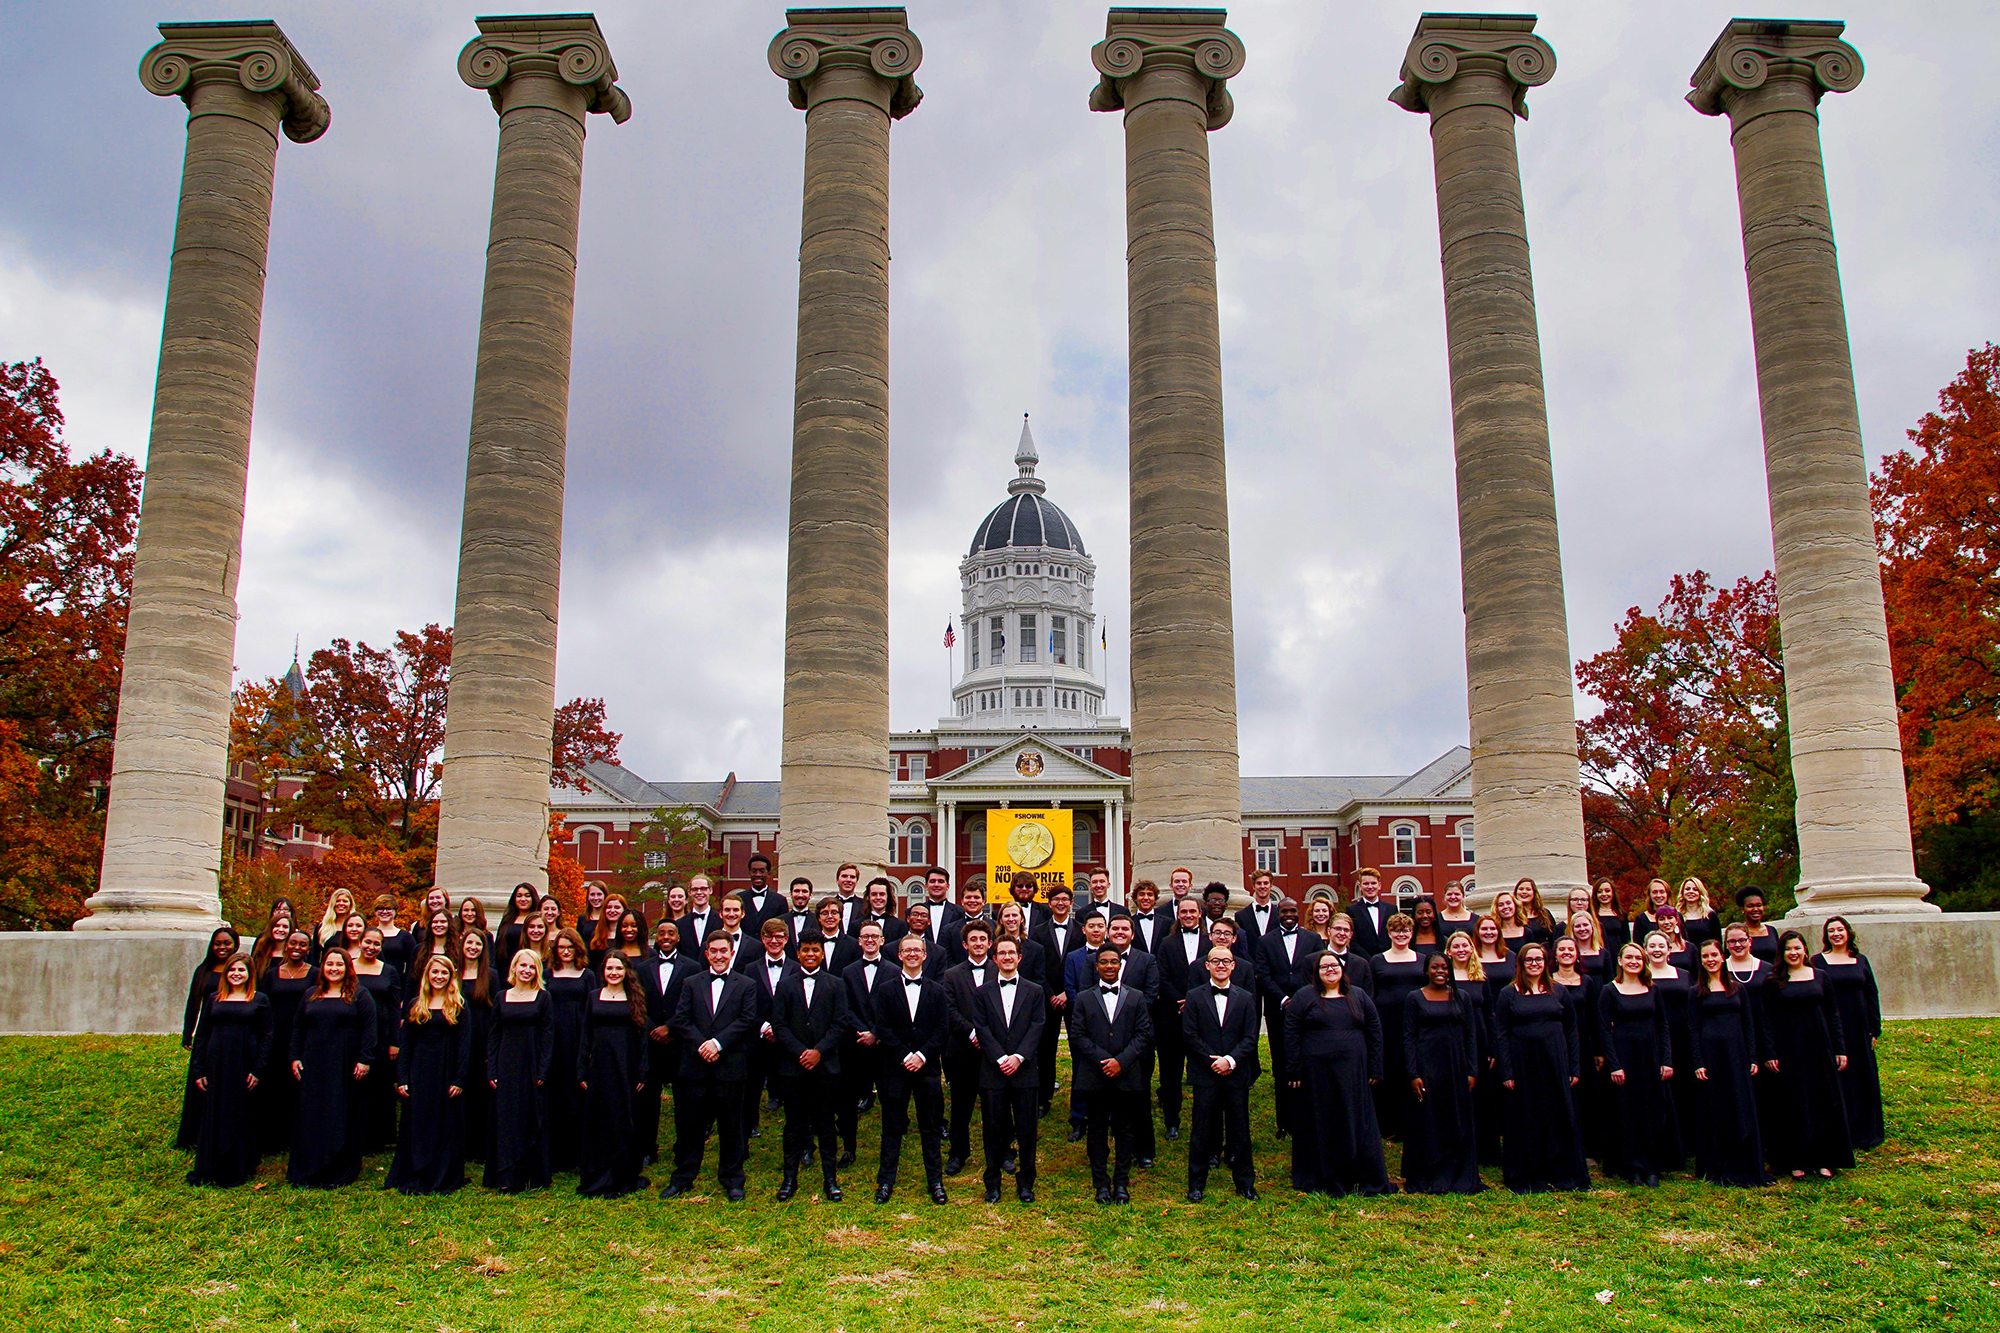 Choir pictured in front of the Columns on the University of Missouri campus